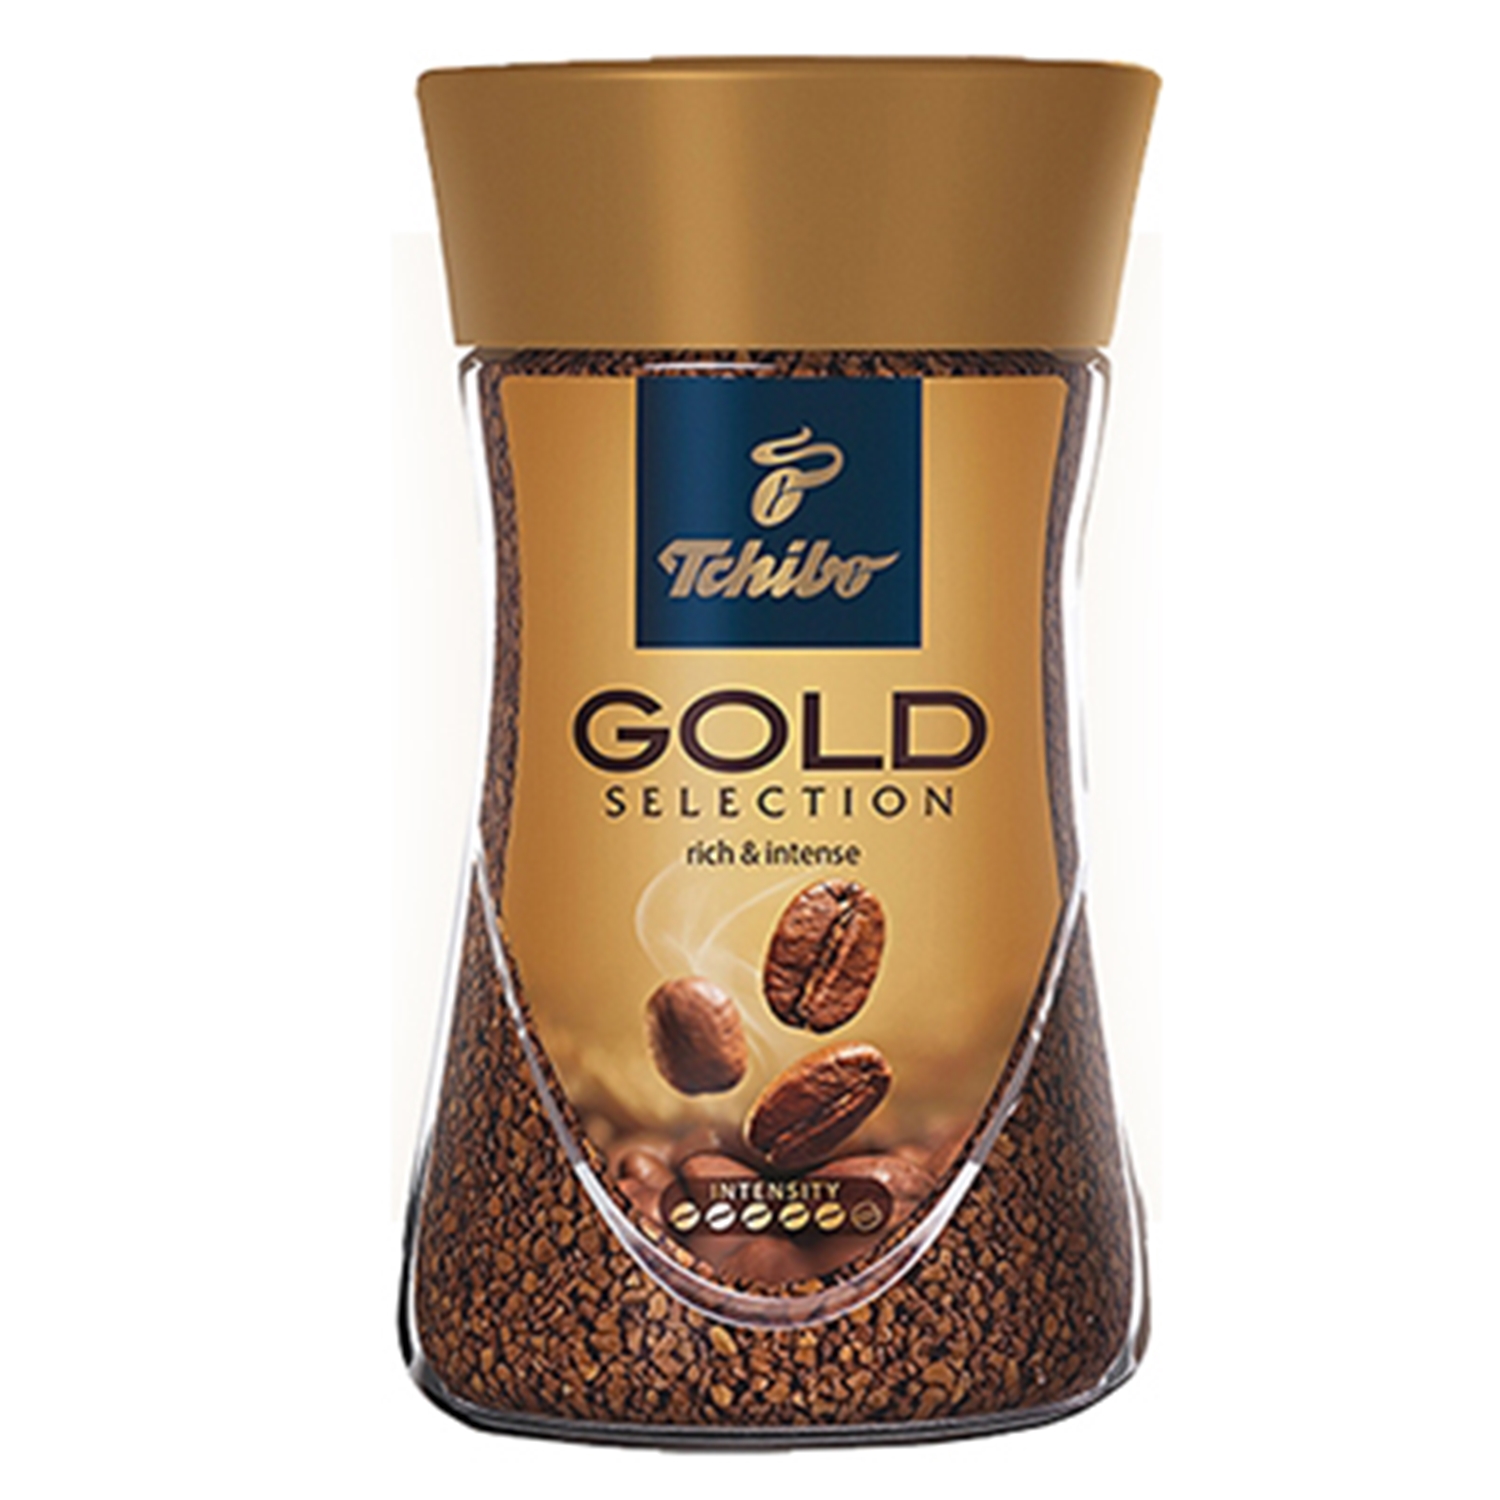 Tchibo Gold, Instant coffee made in Germany, 50g